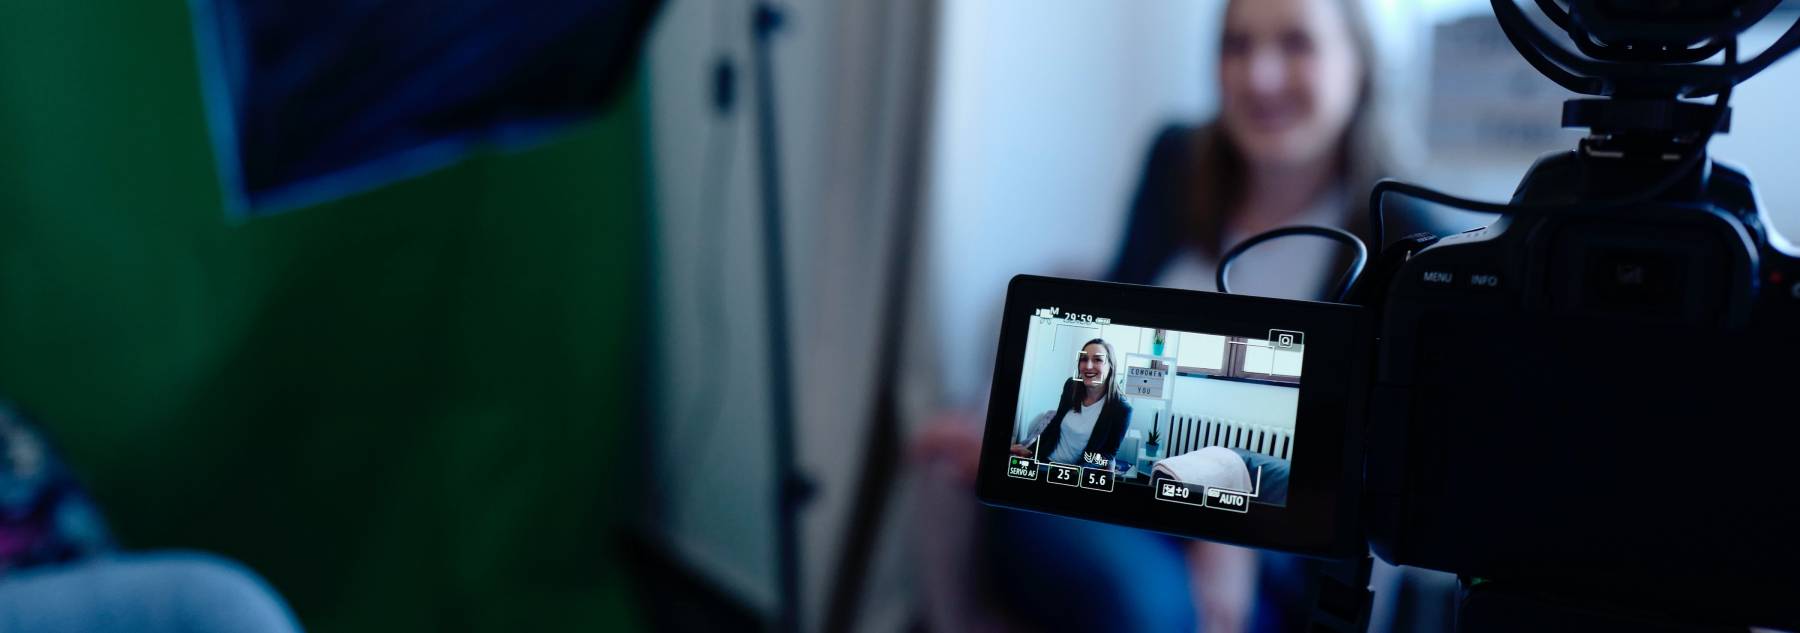 How Important Is Video In Your Sales Strategy?